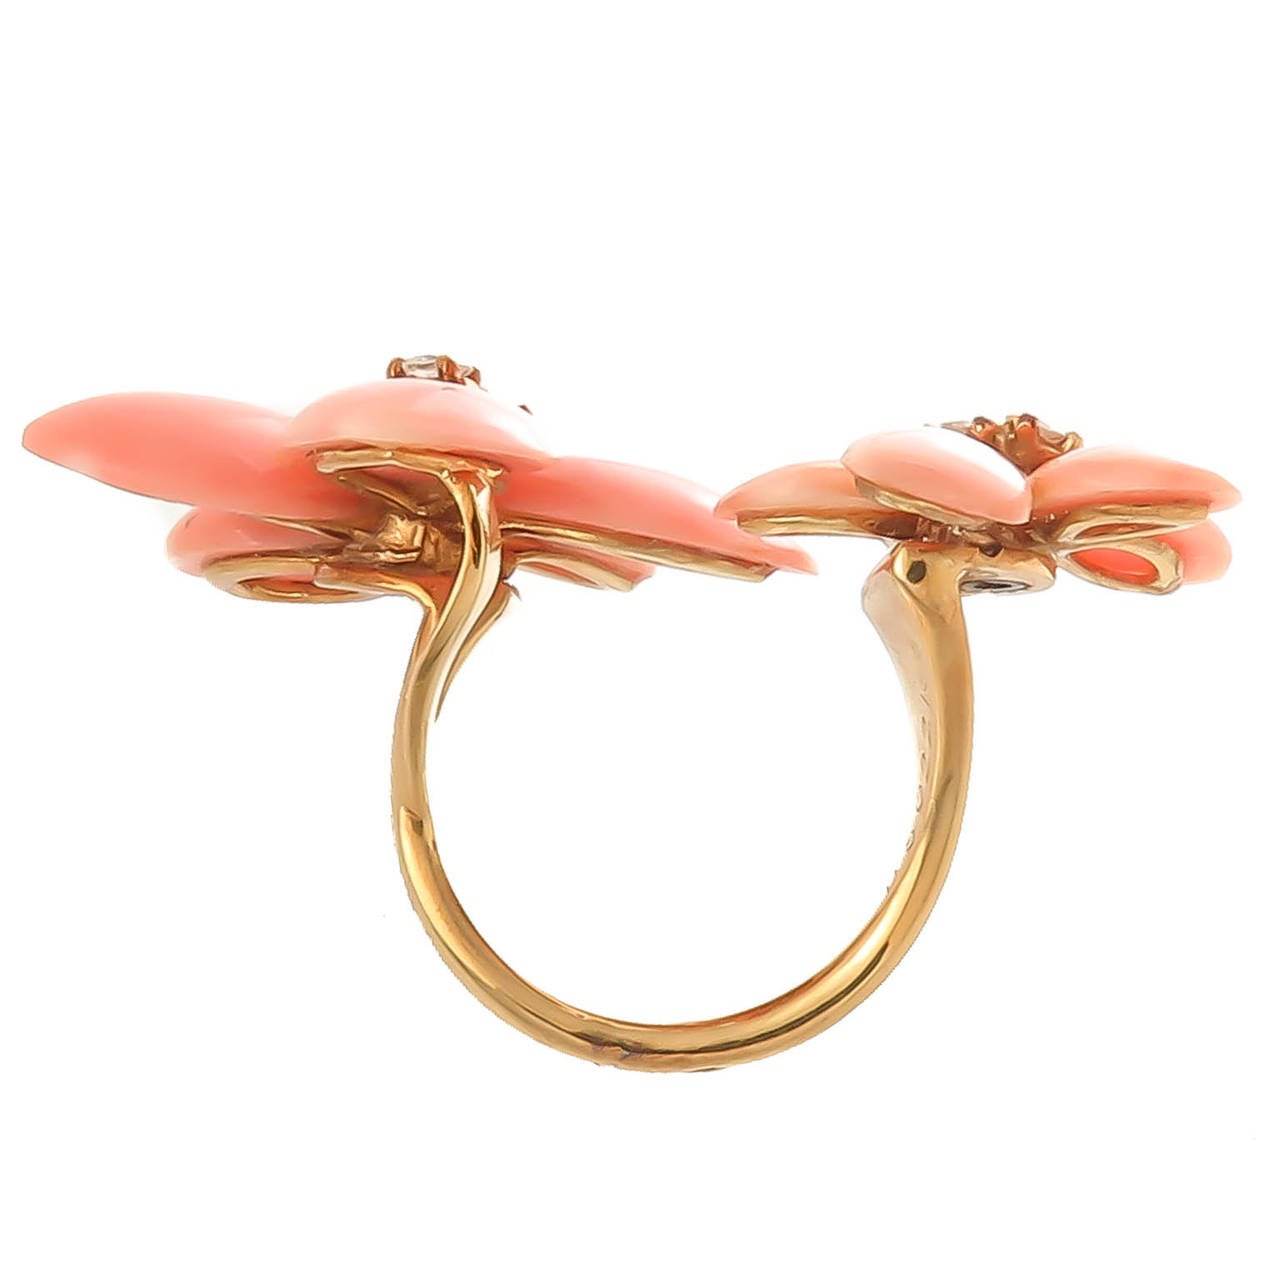 Circa 2010 Frivole Collection Ring by Van Cleef and Arpels, 18K Yellow Gold, with Coral Pedals and Further Accented with Round Brilliant cut Diamonds. Signed and Numbered, Finger size = 6, measurement across the top = 1 3/4 inch across.